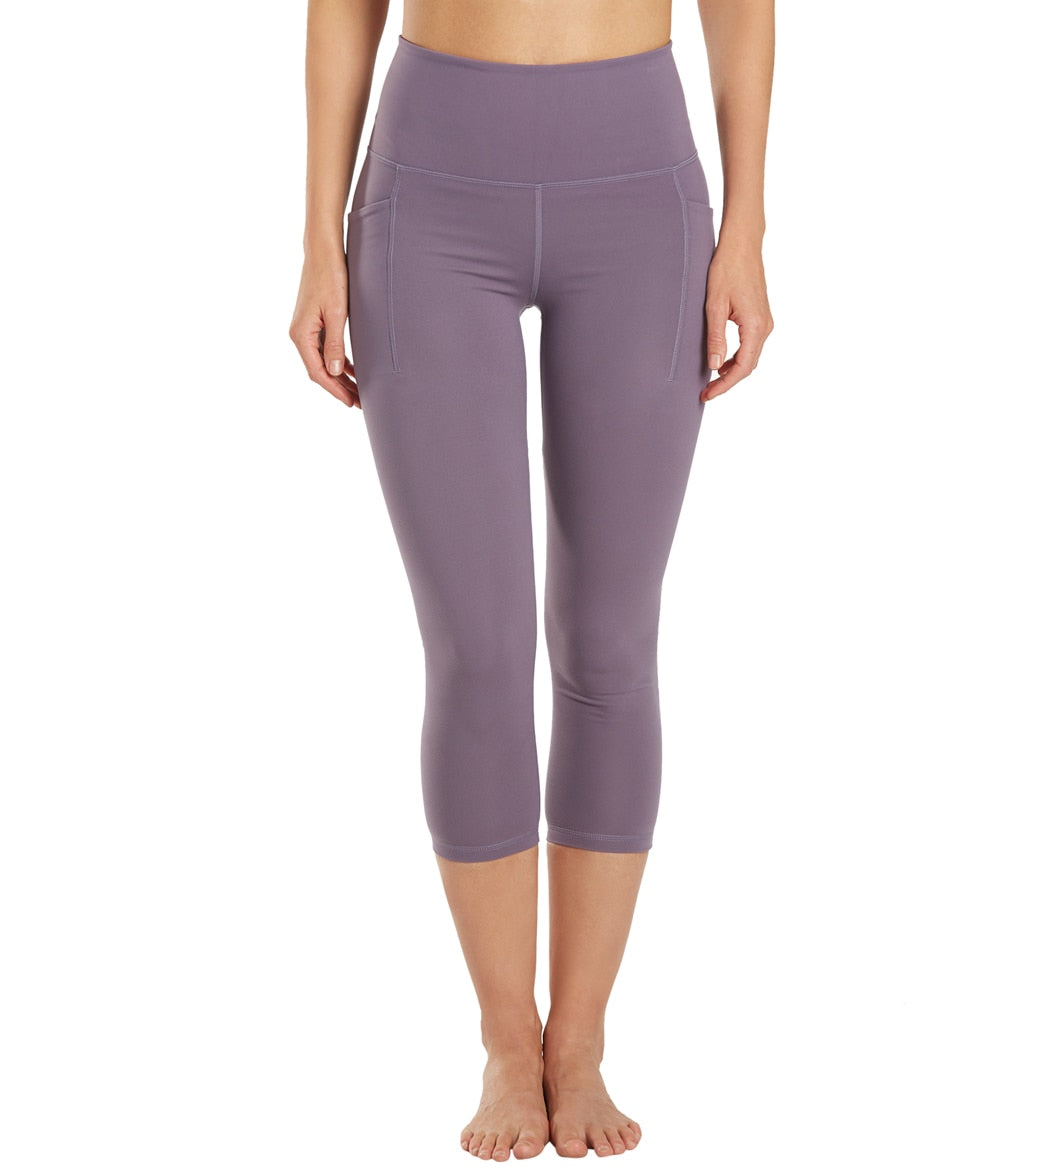 🥰 Capri Yoga Pants from Costco are SO COMFY! These come in multiple colors  and have side pockets! Just $10.99 each through 7/23!…